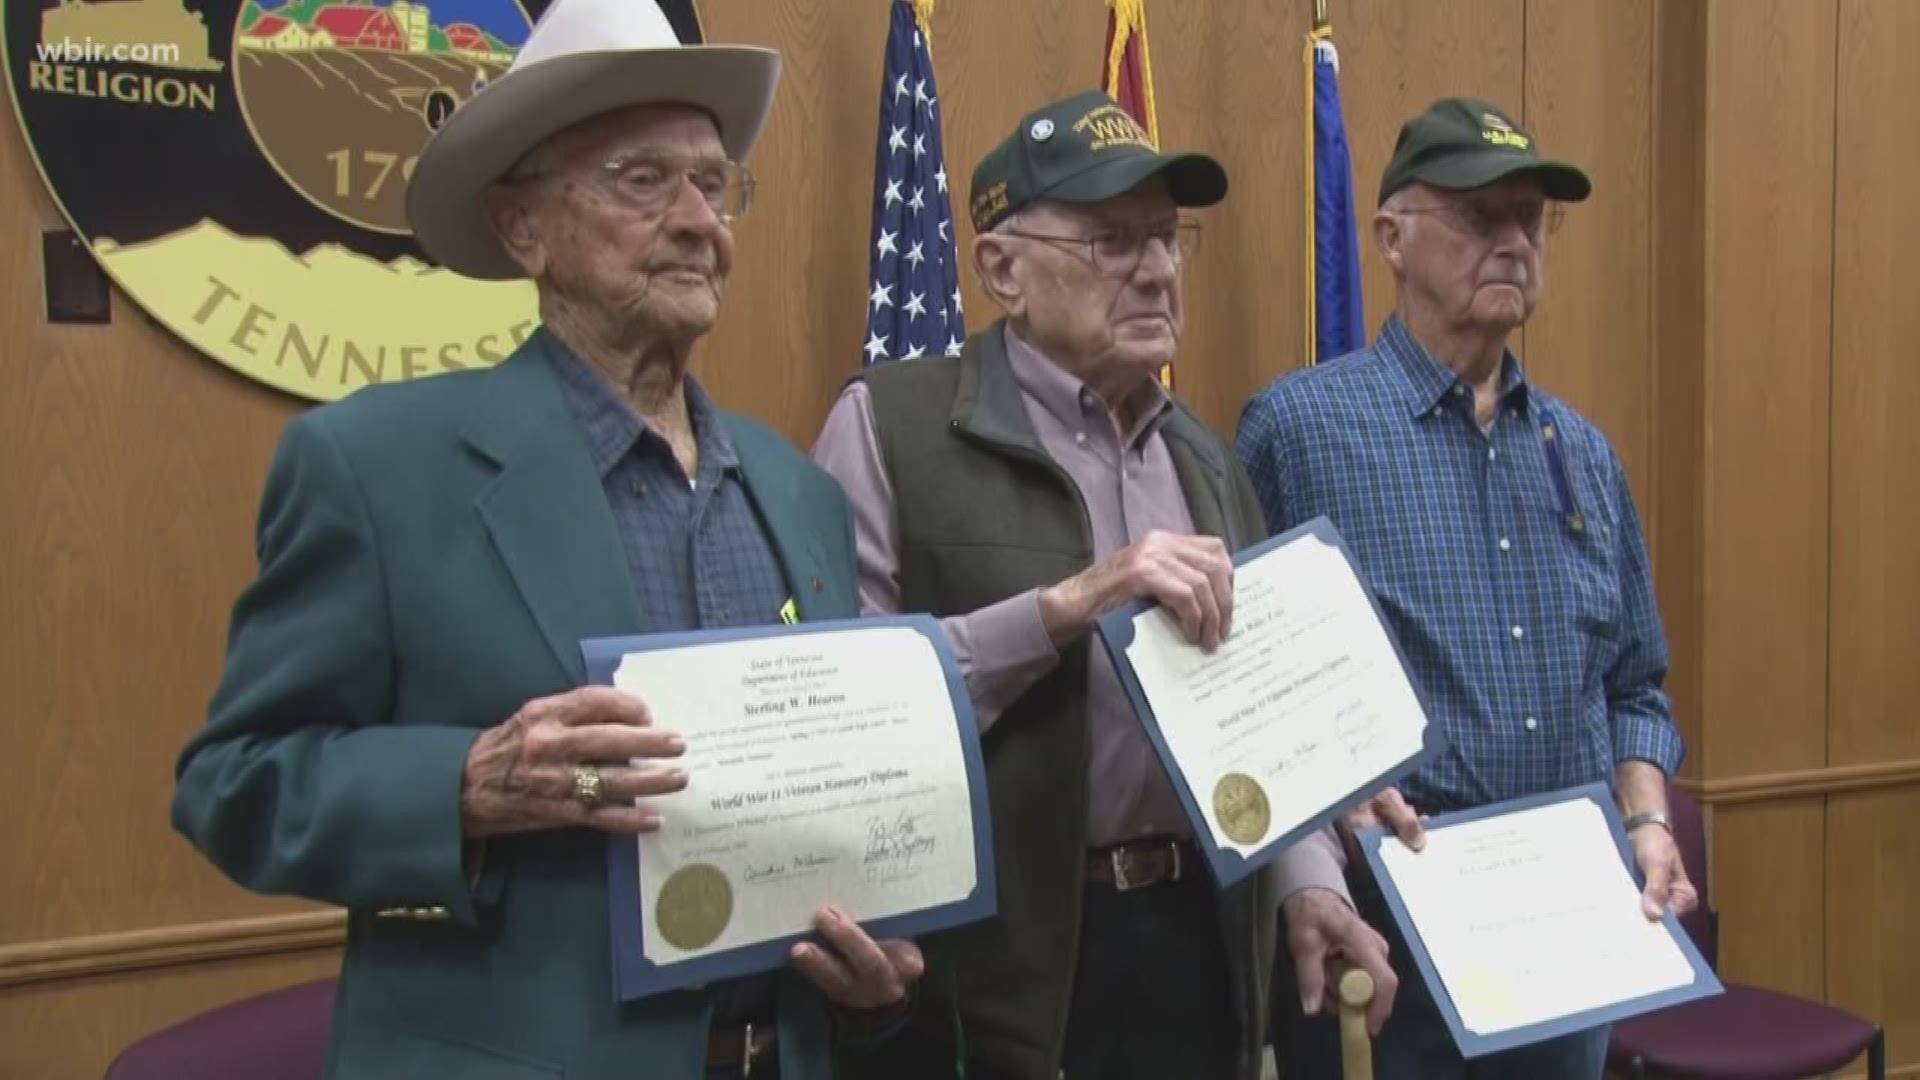 After leaving school early to serve our country overseas, three local veterans now have their high school diplomas.